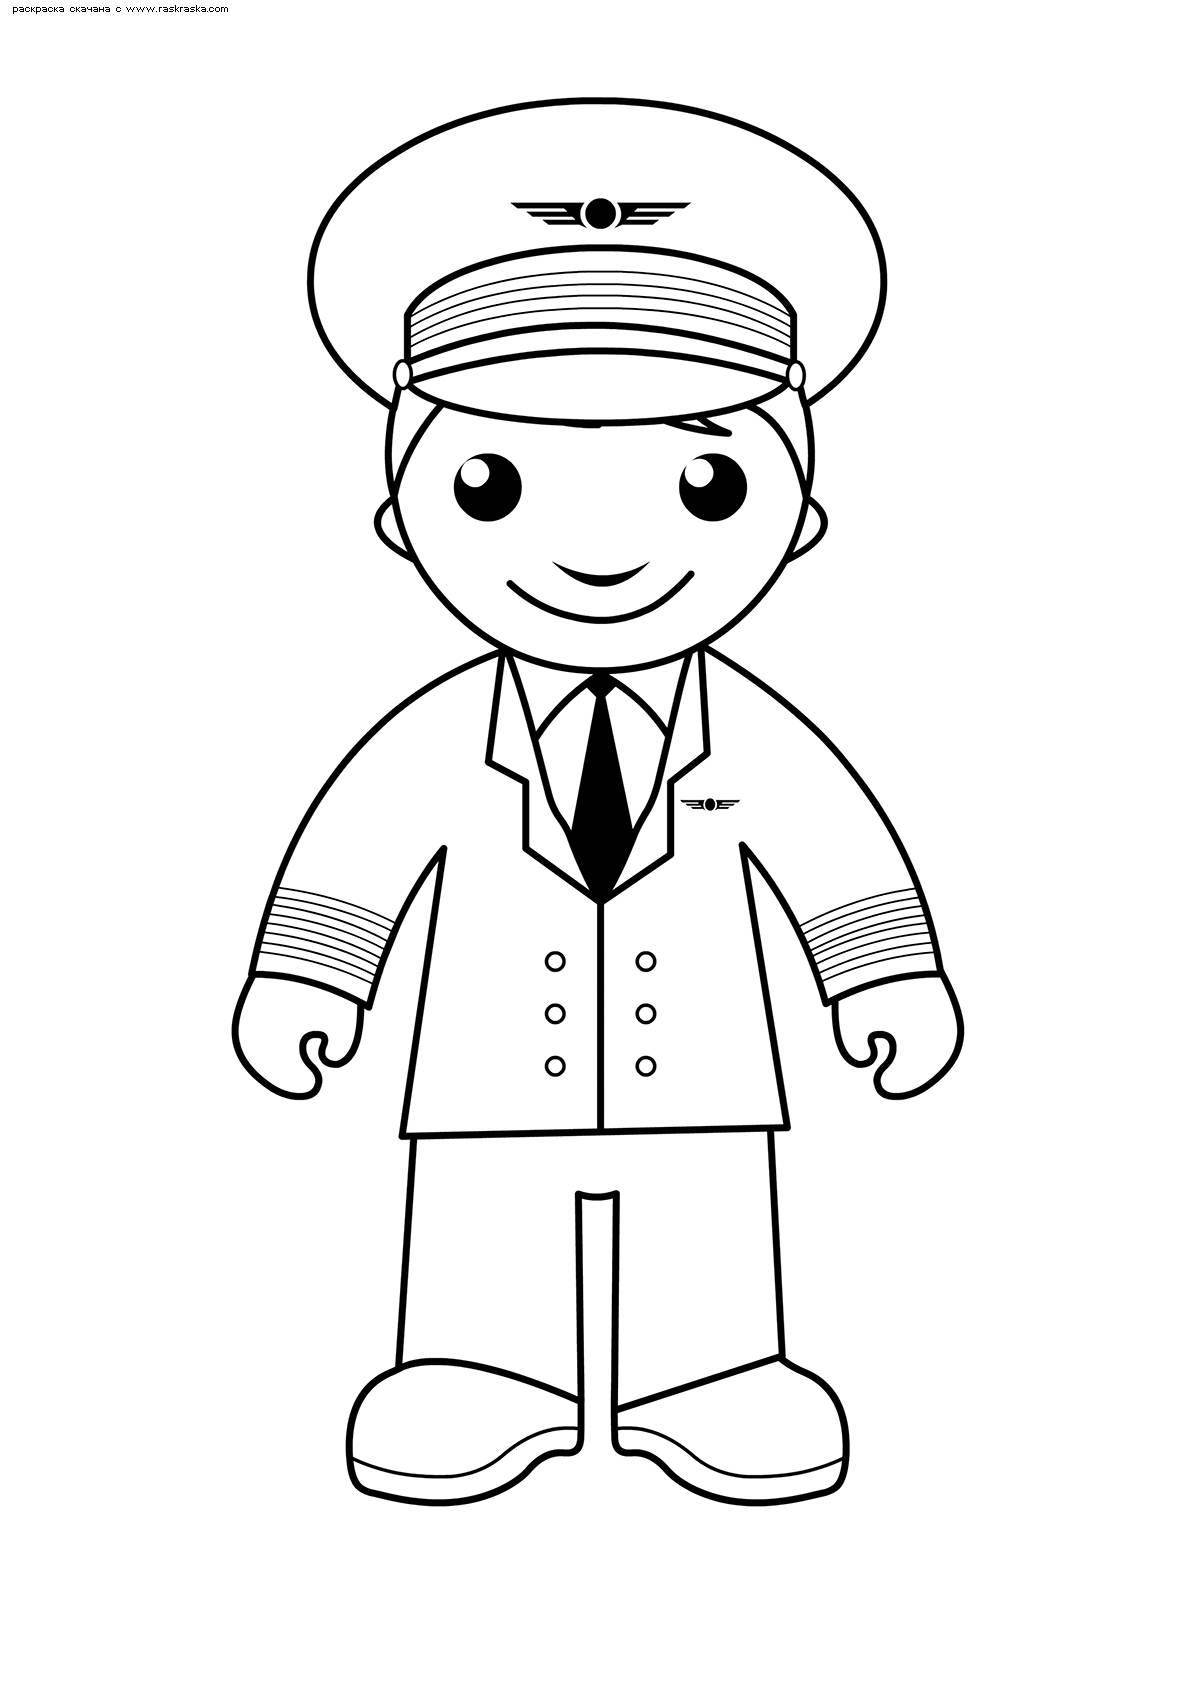 Colorful pilot coloring page for kids